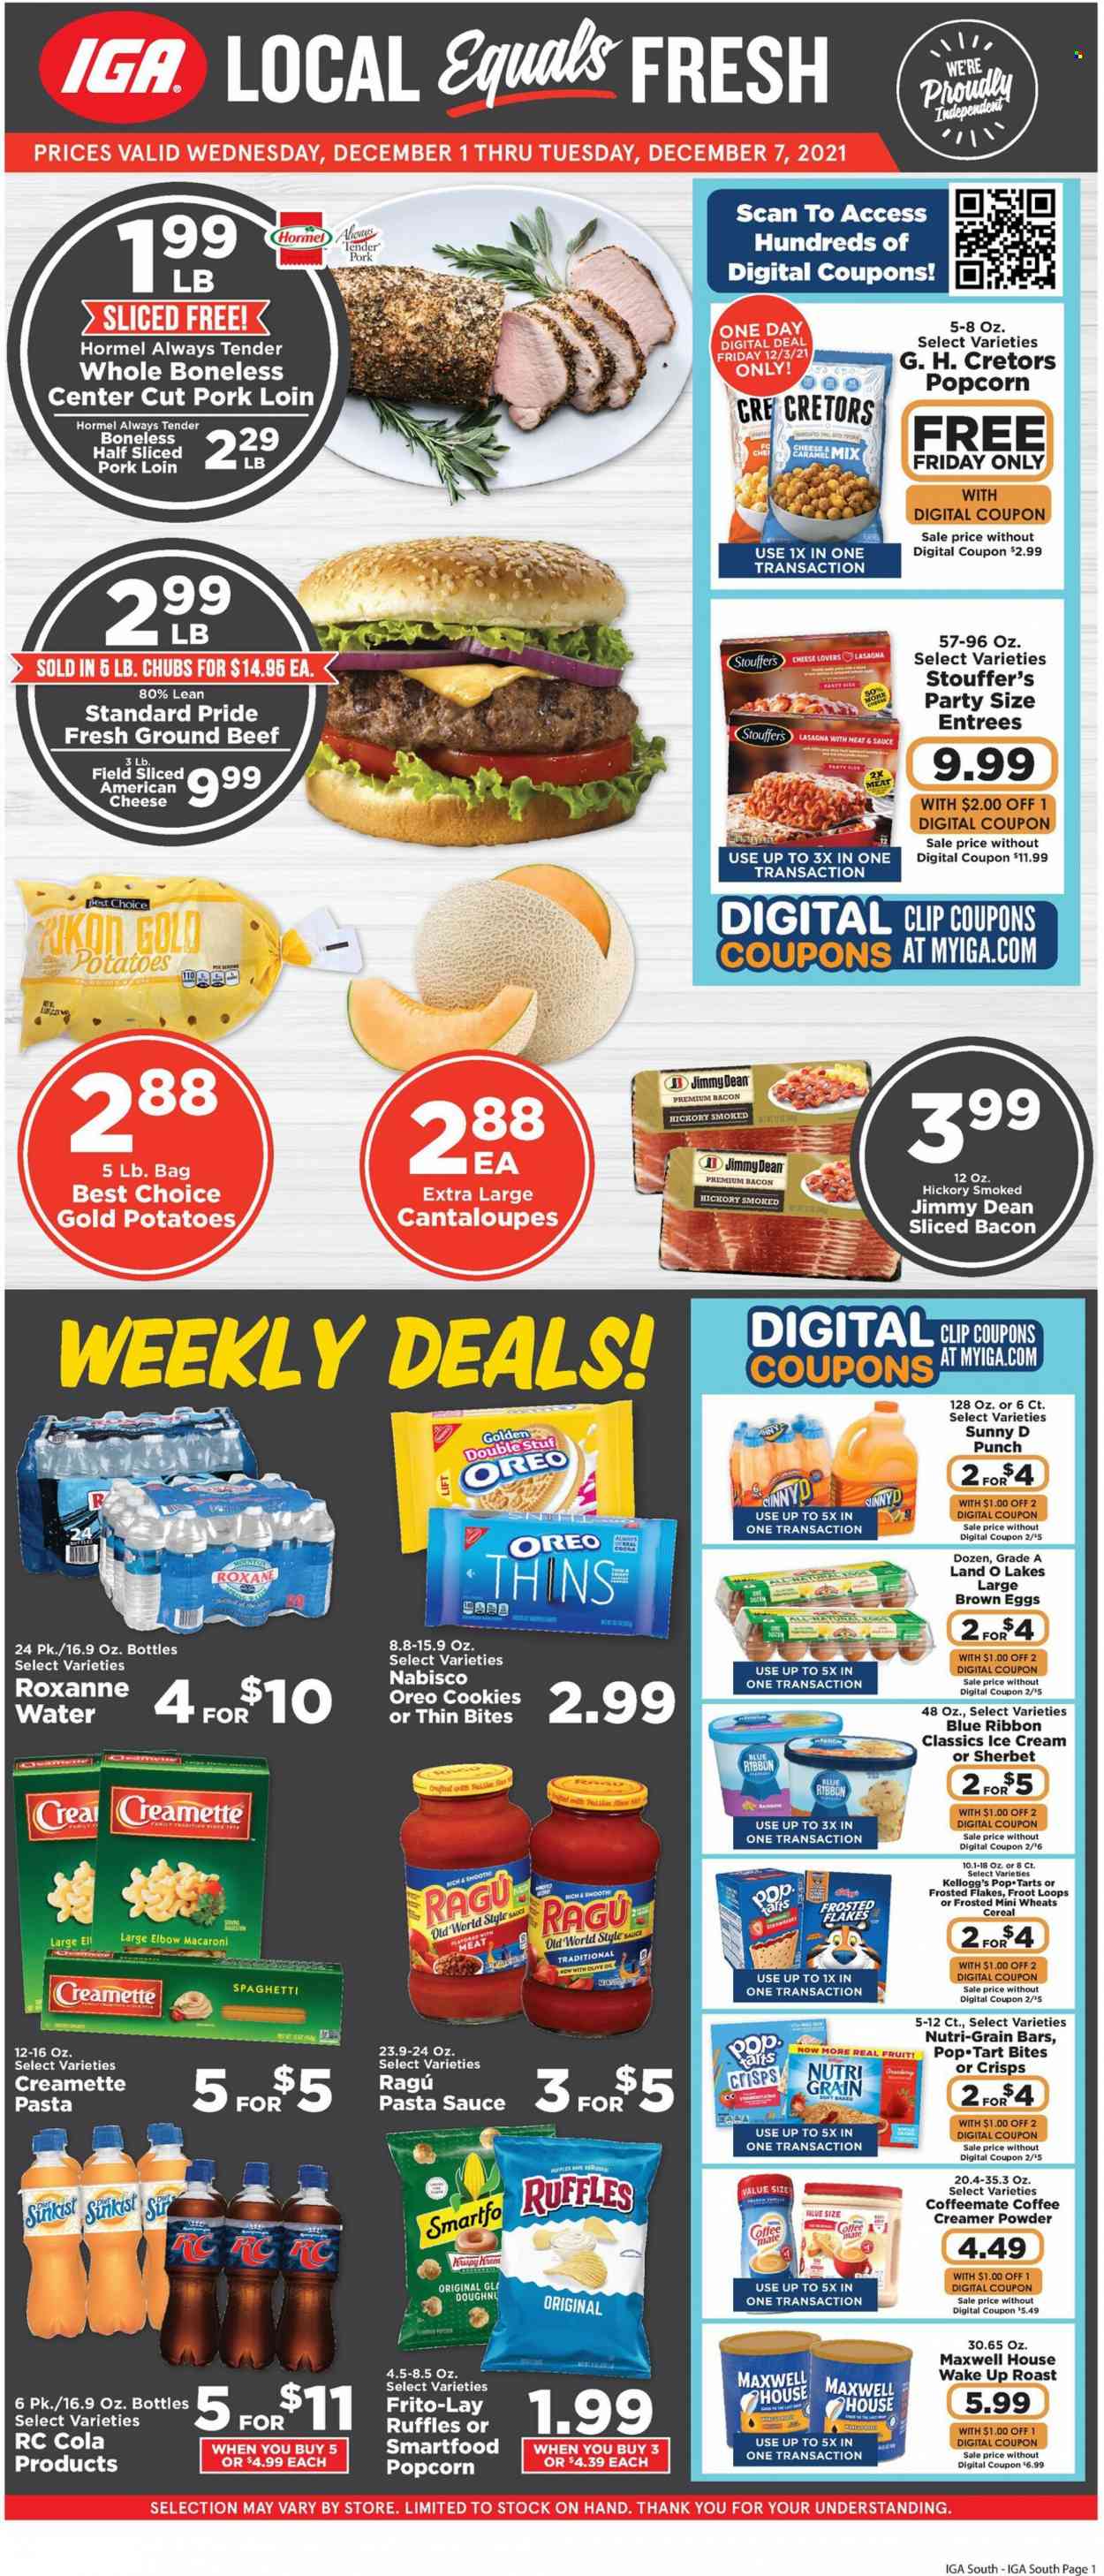 thumbnail - IGA Flyer - 12/01/2021 - 12/07/2021 - Sales products - Blue Ribbon, cantaloupe, potatoes, spaghetti, pasta sauce, macaroni, lasagna meal, Jimmy Dean, Hormel, ragú pasta, bacon, american cheese, Oreo, Coffee-Mate, eggs, creamer, ice cream, sherbet, Stouffer's, cookies, Kellogg's, Pop-Tarts, Nutri-Grain bars, Smartfood, Thins, popcorn, Frito-Lay, Ruffles, cocoa, cereals, Frosted Flakes, Nutri-Grain, Creamette, caramel, ragu, oil, Maxwell House, punch, beef meat, ground beef, pork loin, pork meat, cup. Page 1.